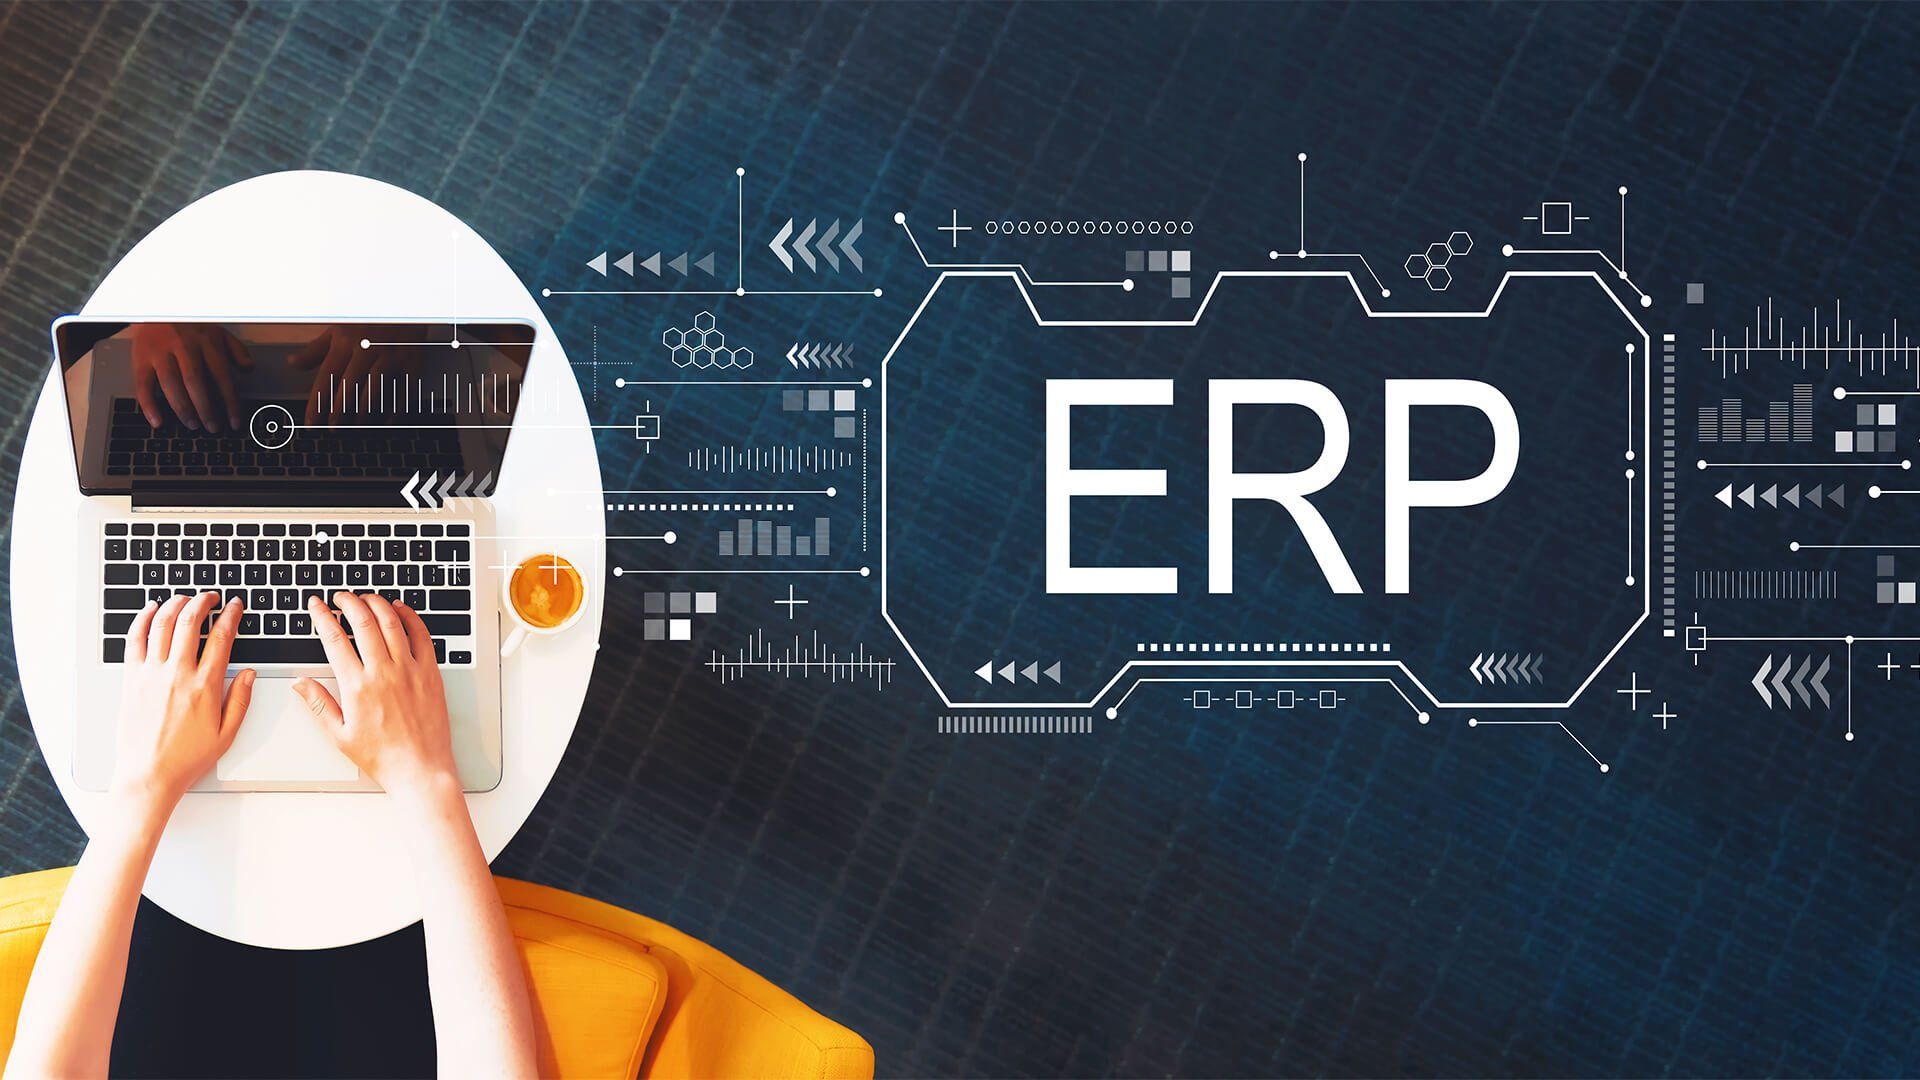 Build or Buy an ERP solution?